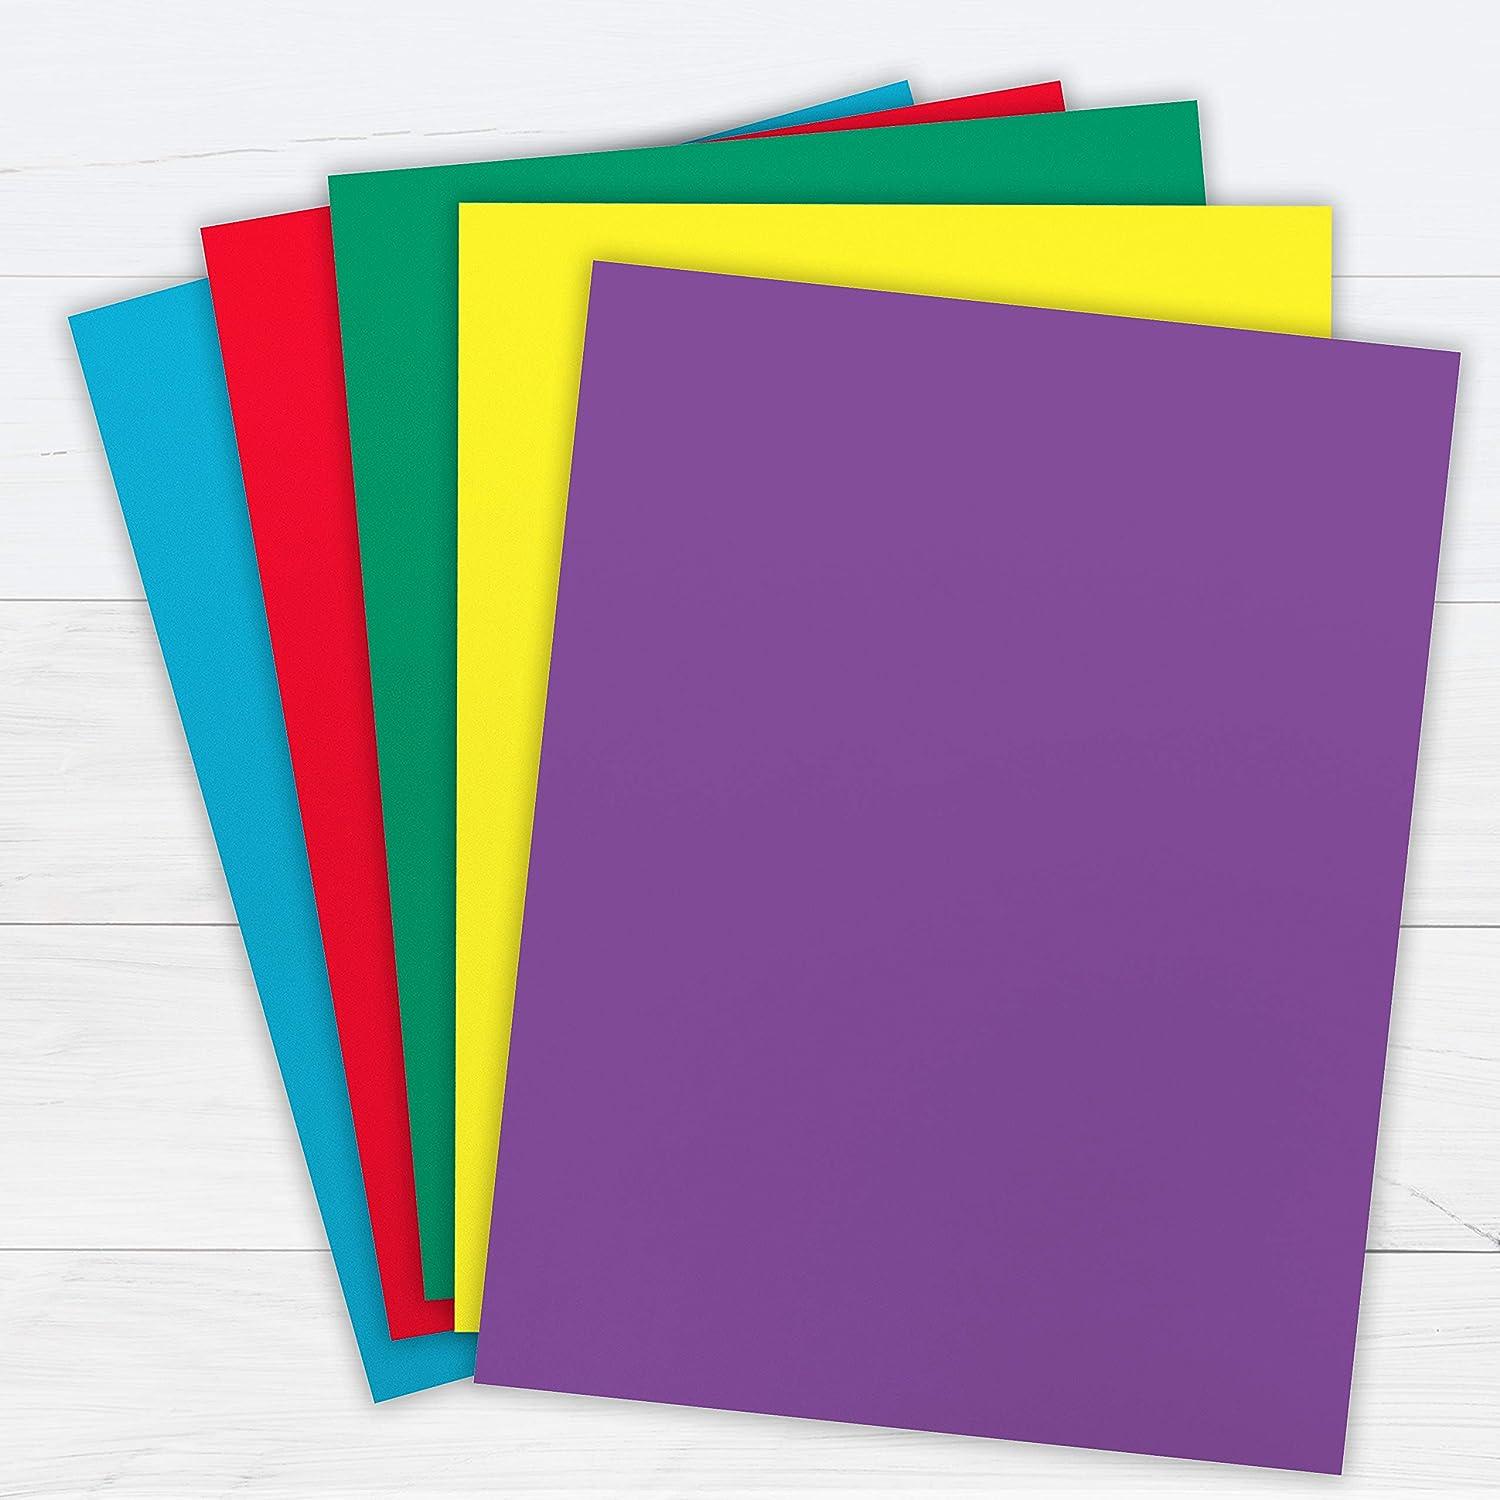 PrintWorks Neon Cardstock for Craft Projects